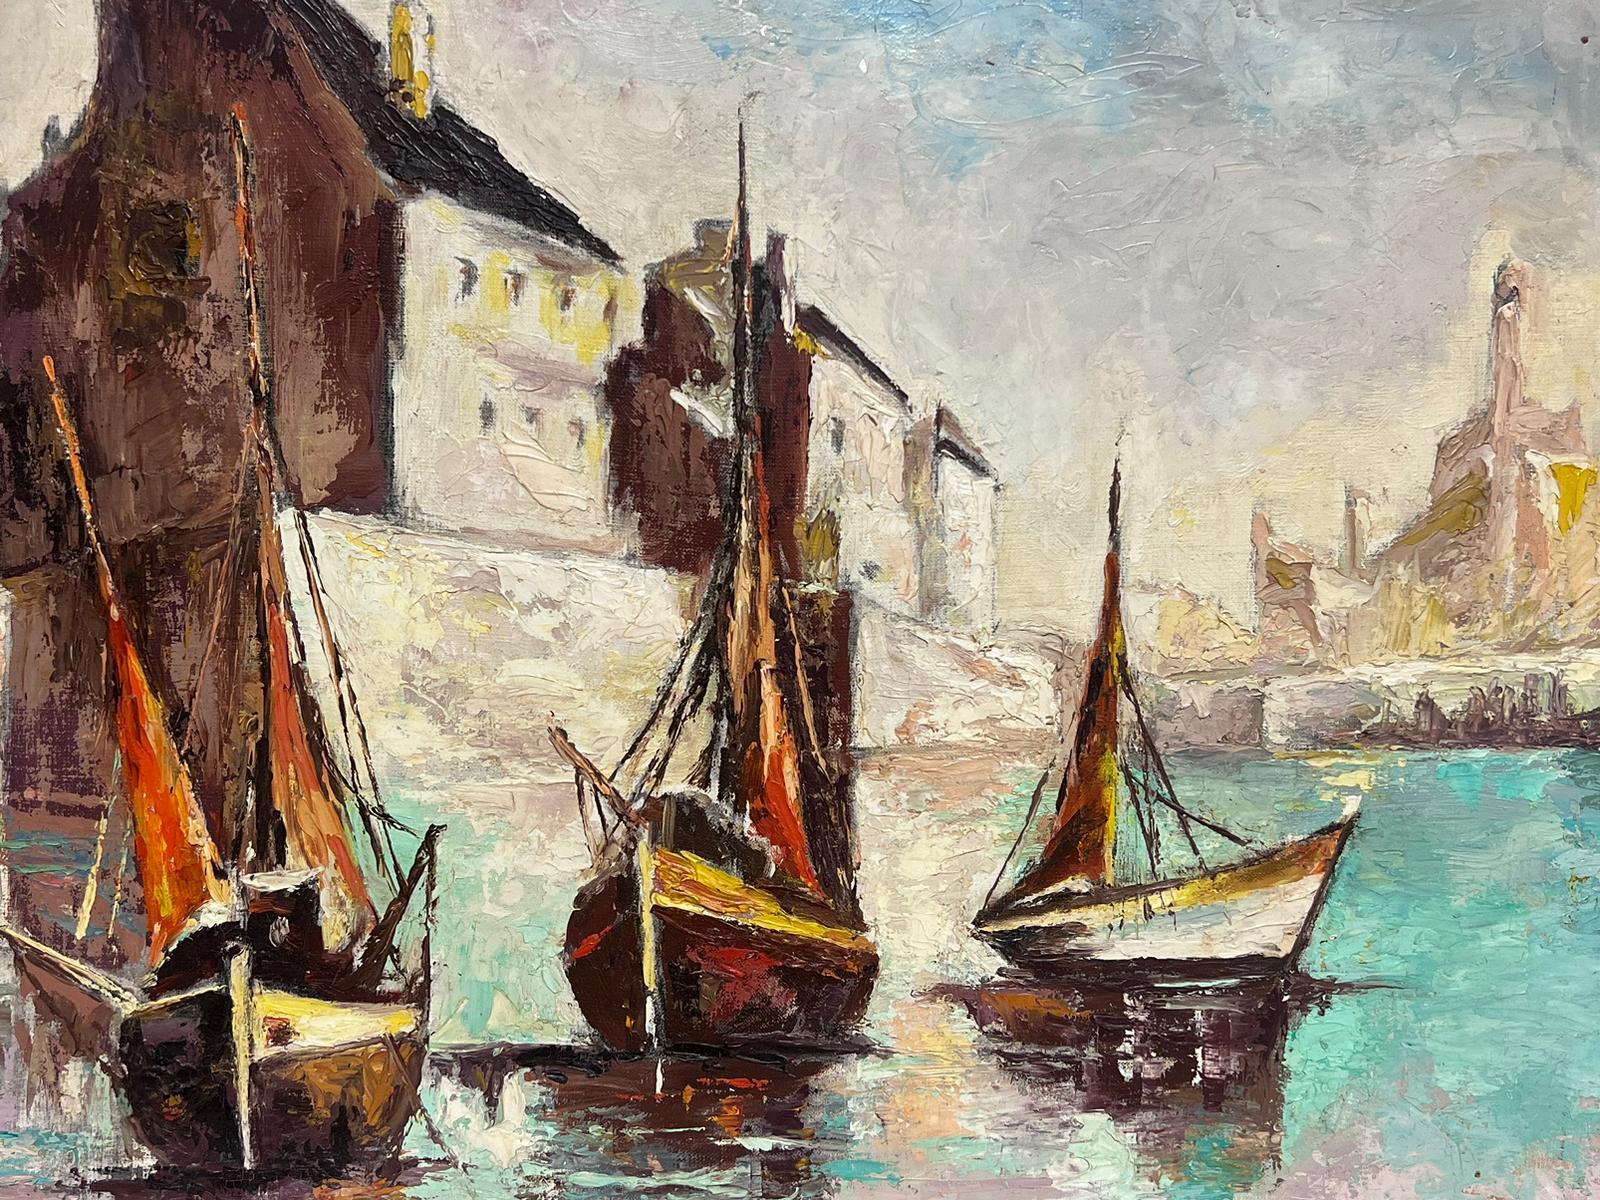 The Sleepy Harbor
French artist signed and dated 1976
oil on canvas, unframed
canvas: 18 x 21.75 inches
provenance: private collection, France
condition: very good and sound condition